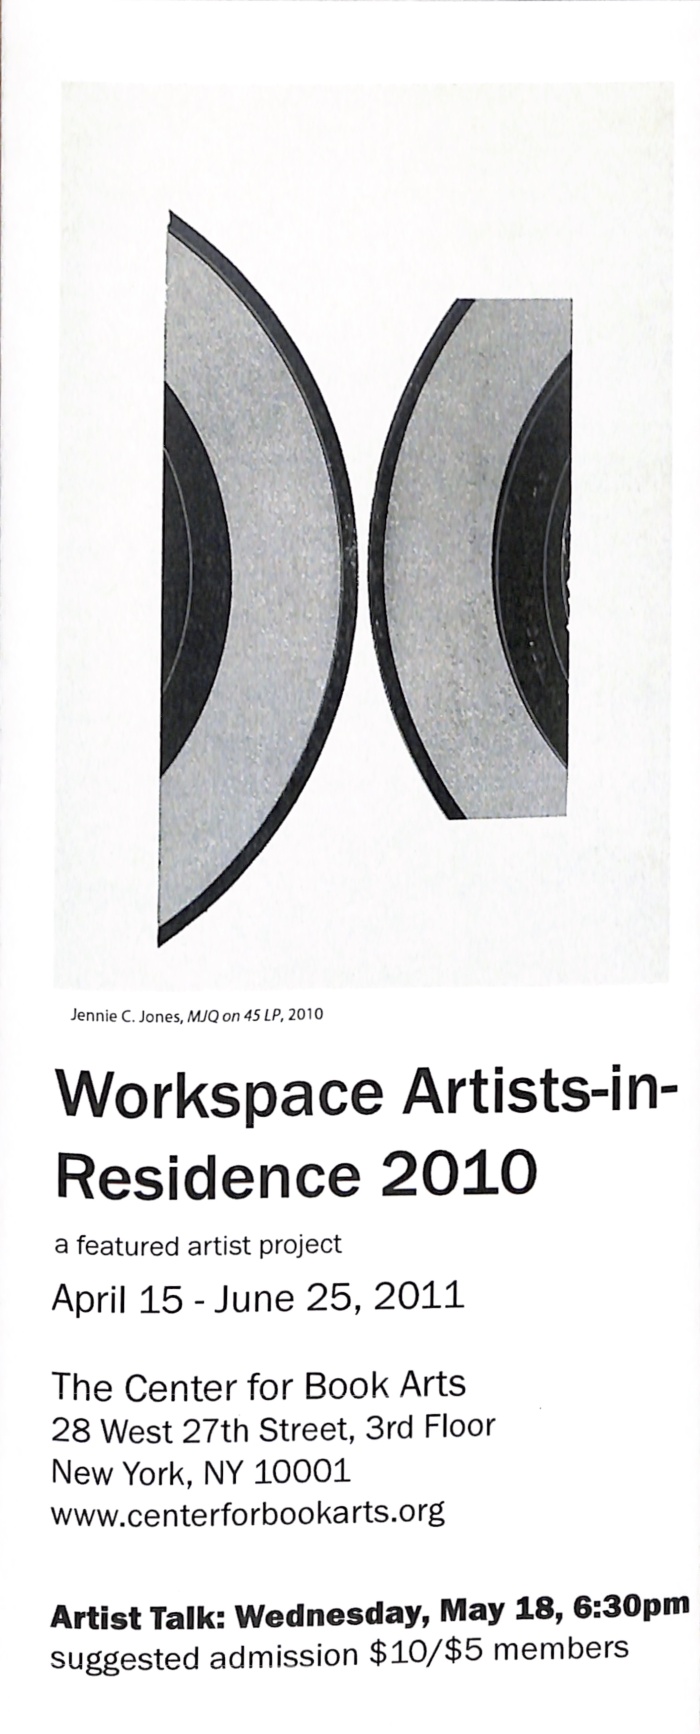 Exhibition brochure for "2010 Artists-in-Residence Workspace Program"